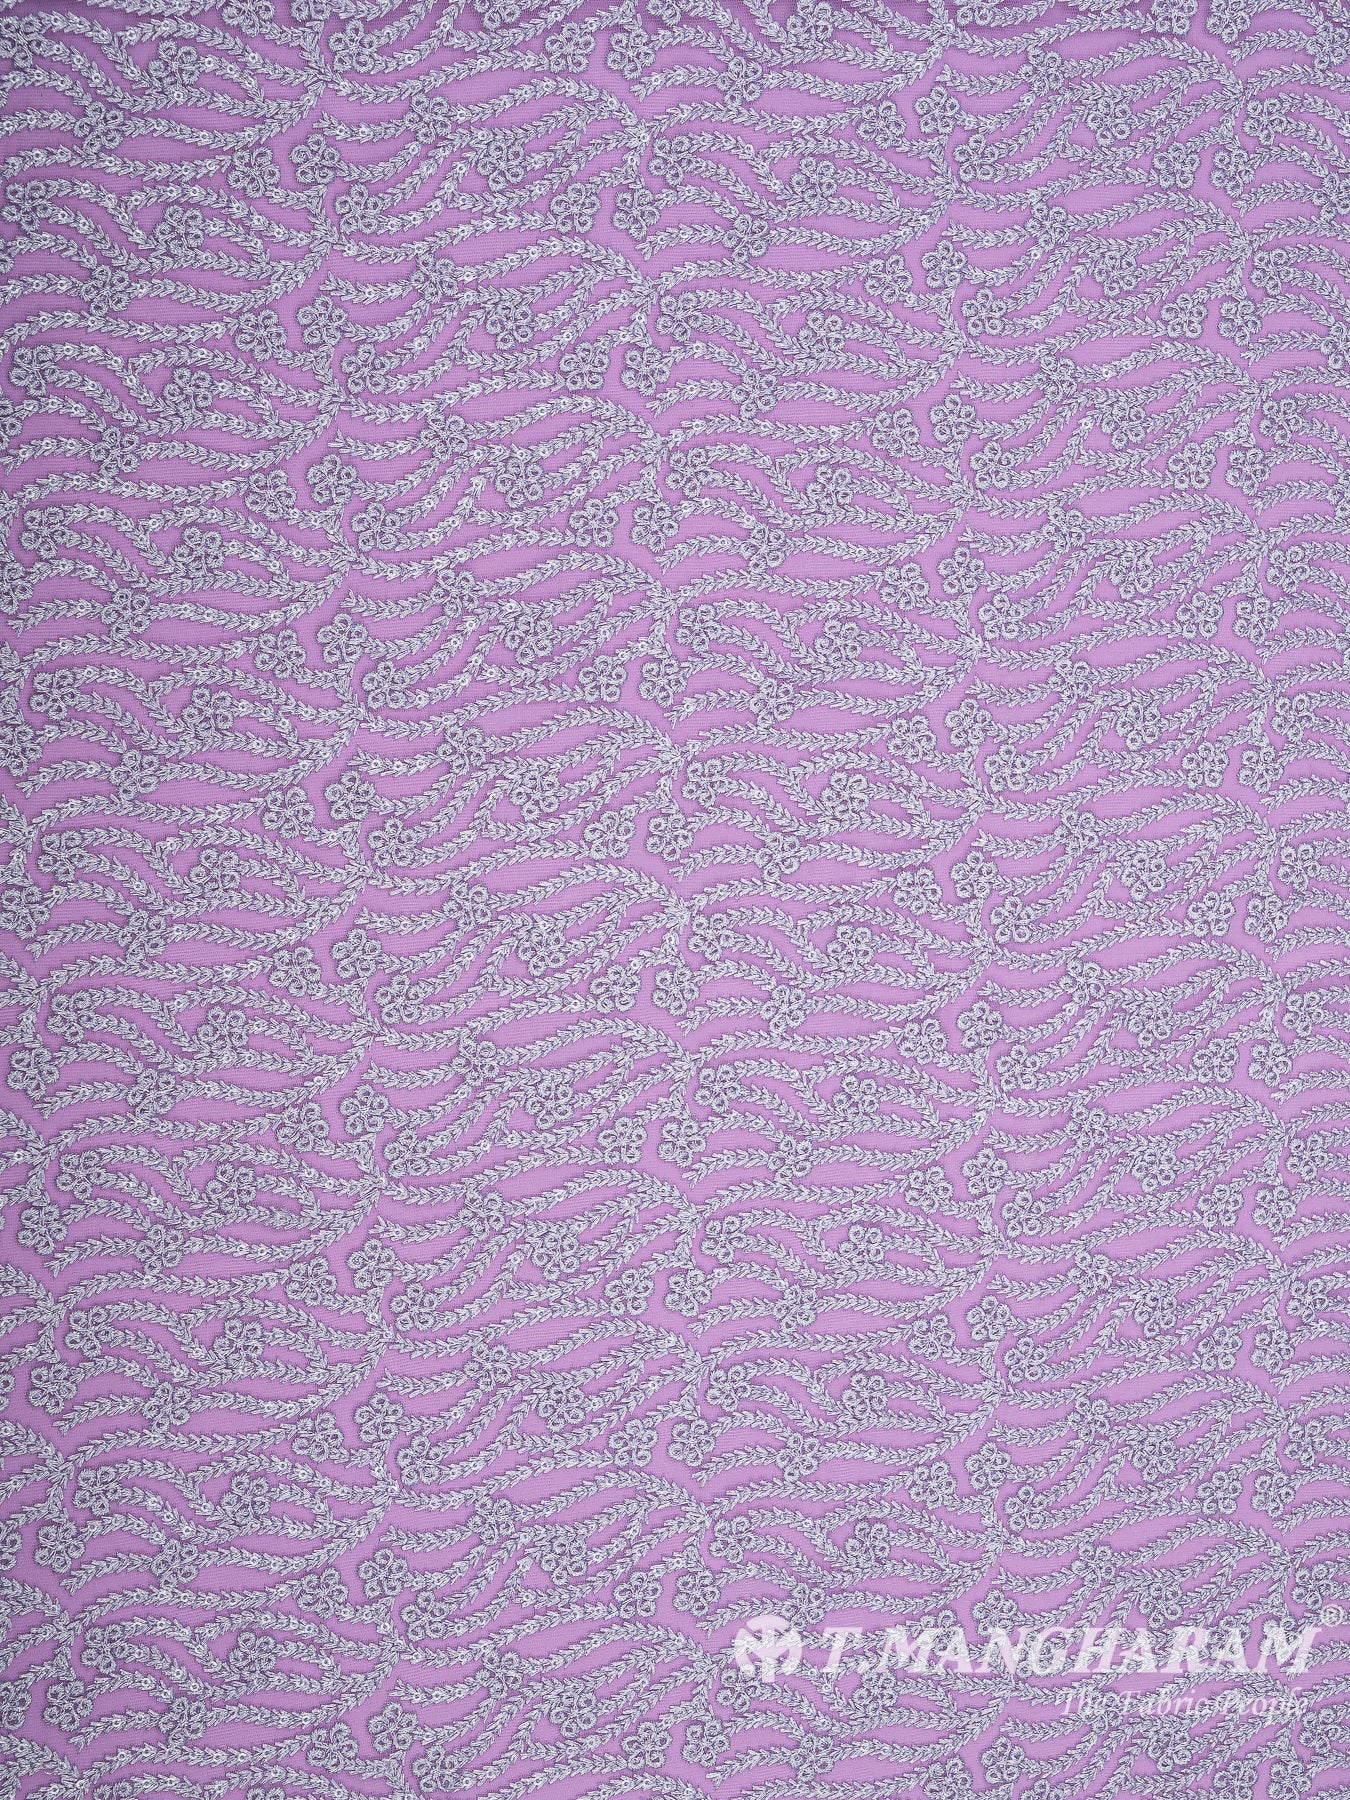 Violet Net Embroidery Fabric - EC8432 view-3